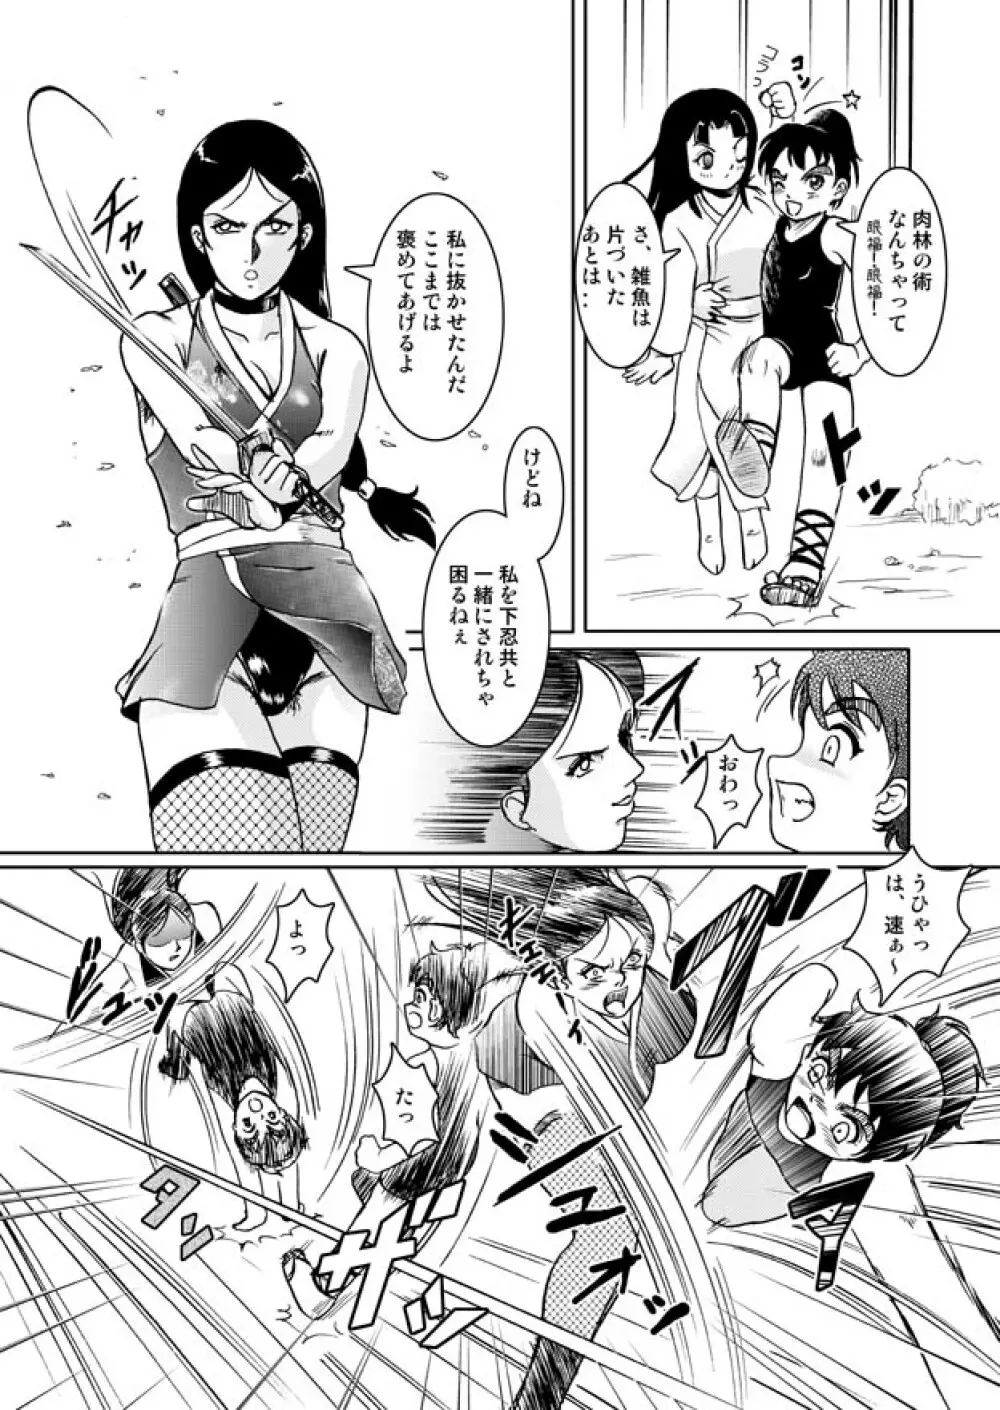 Same-themed manga about kid fighting female ninjas from japanese imageboard. Page.8